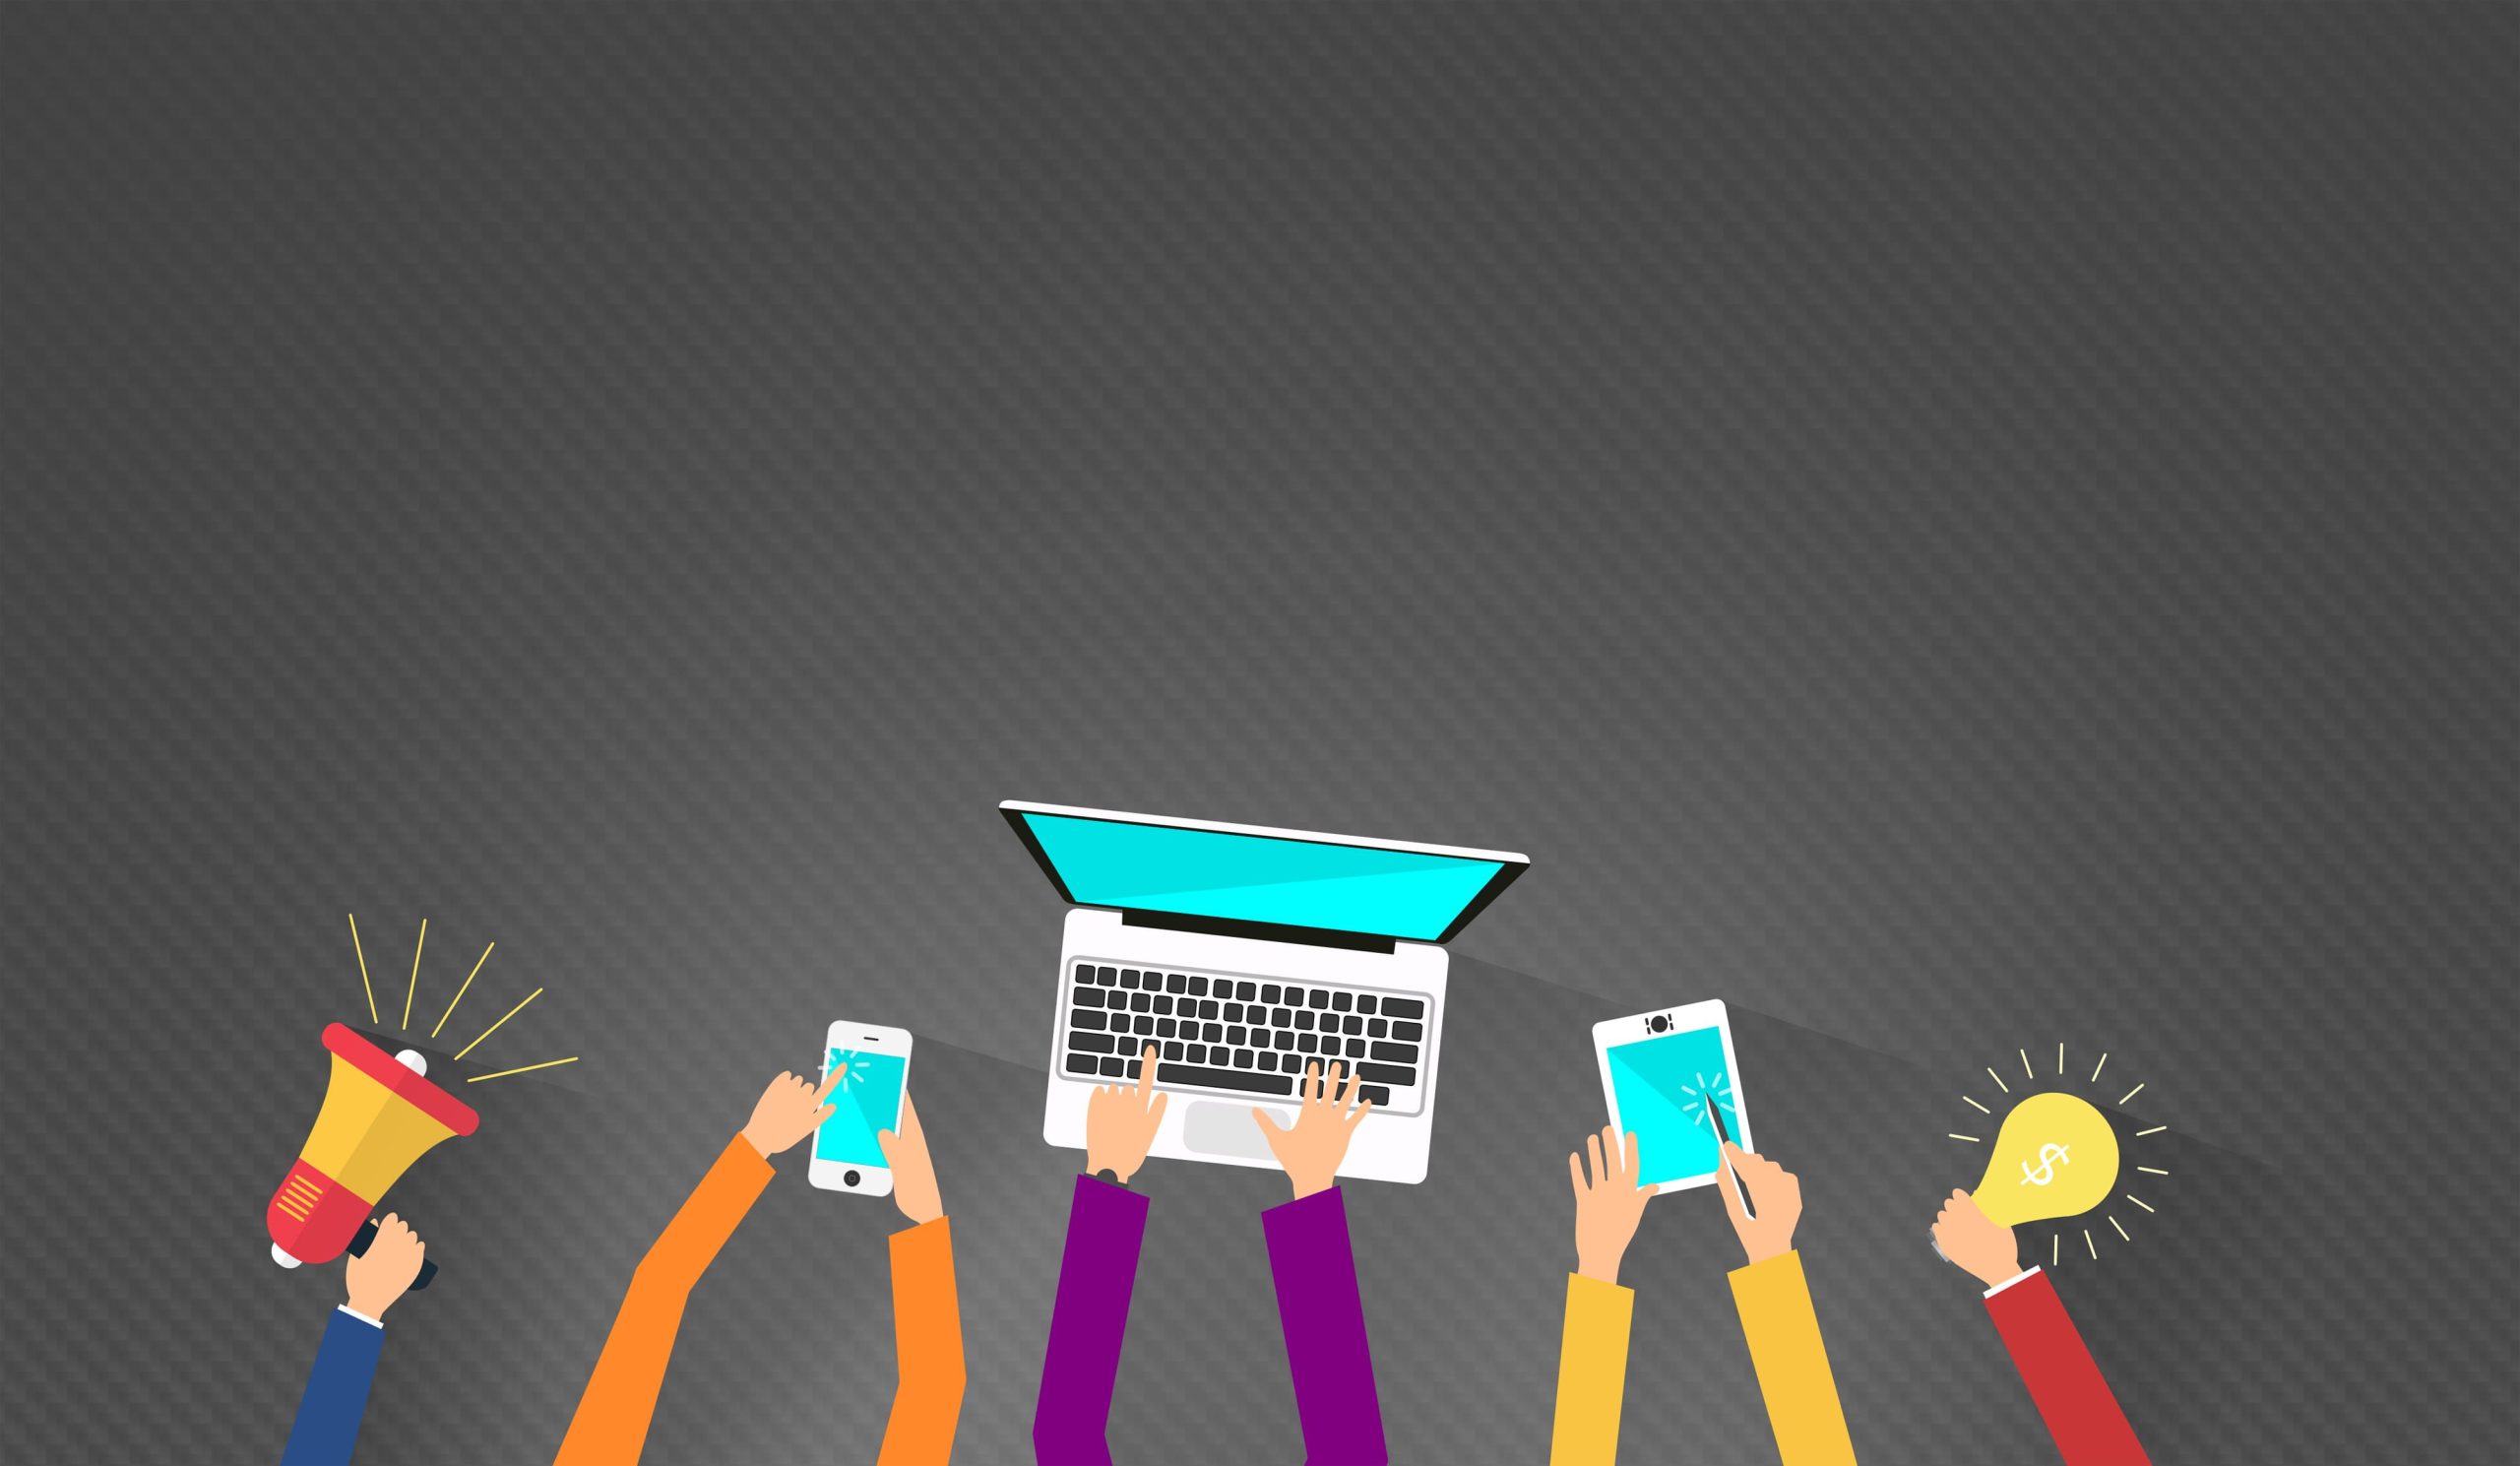 five hands representing different modes of digital marketing used by marketers